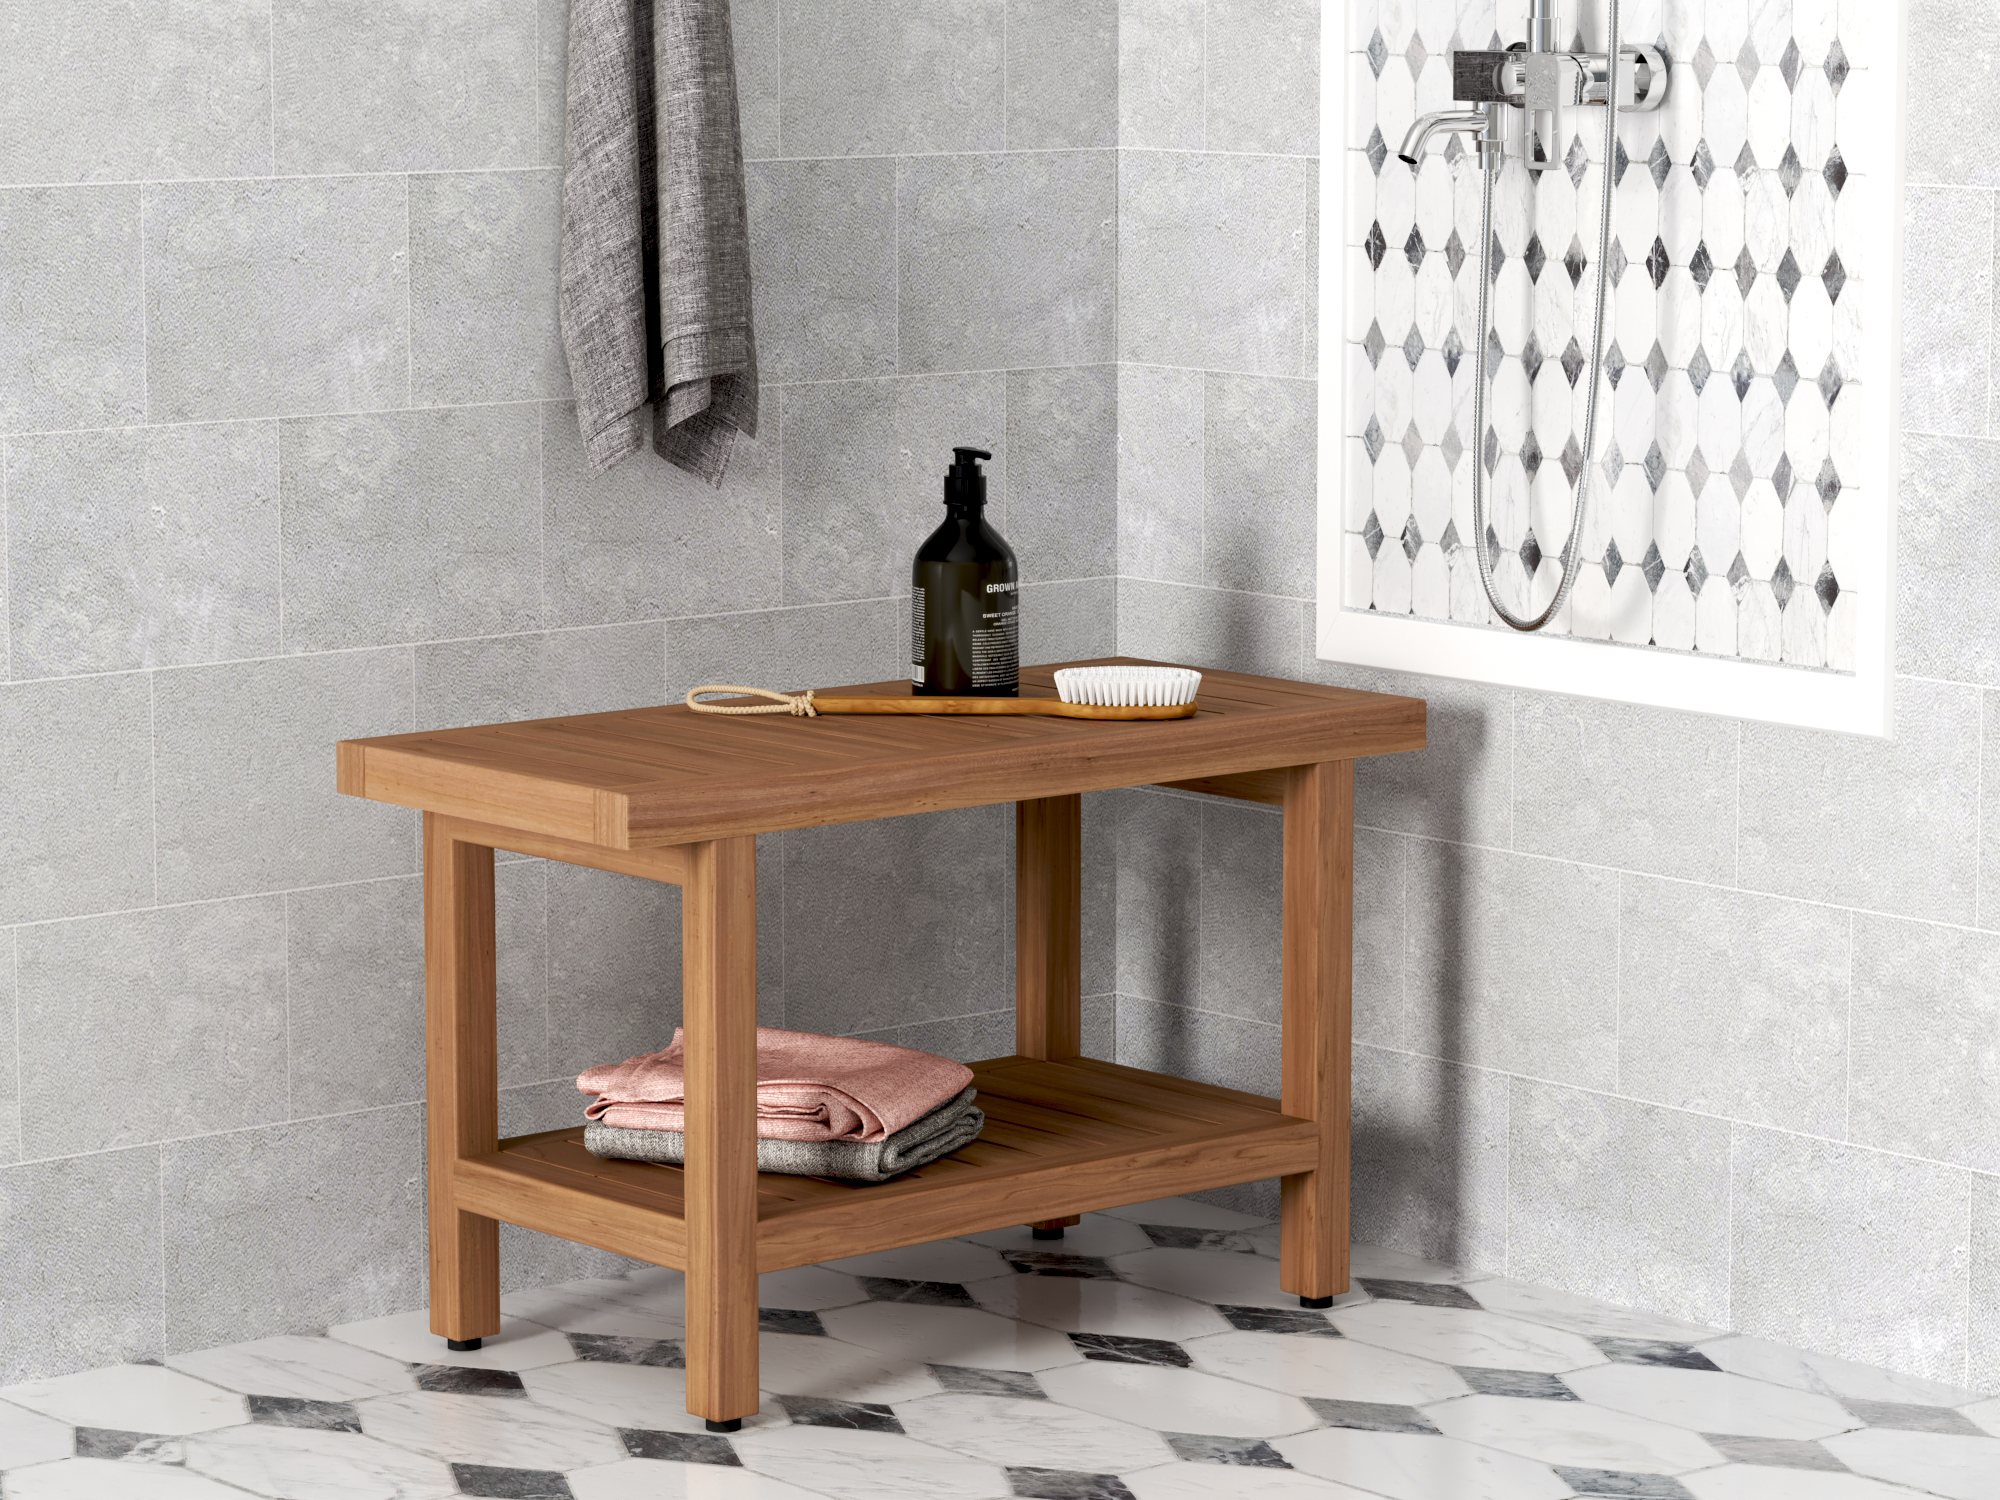 Spa™ Teak Shower Bench with Shelf - Safety and Style For The